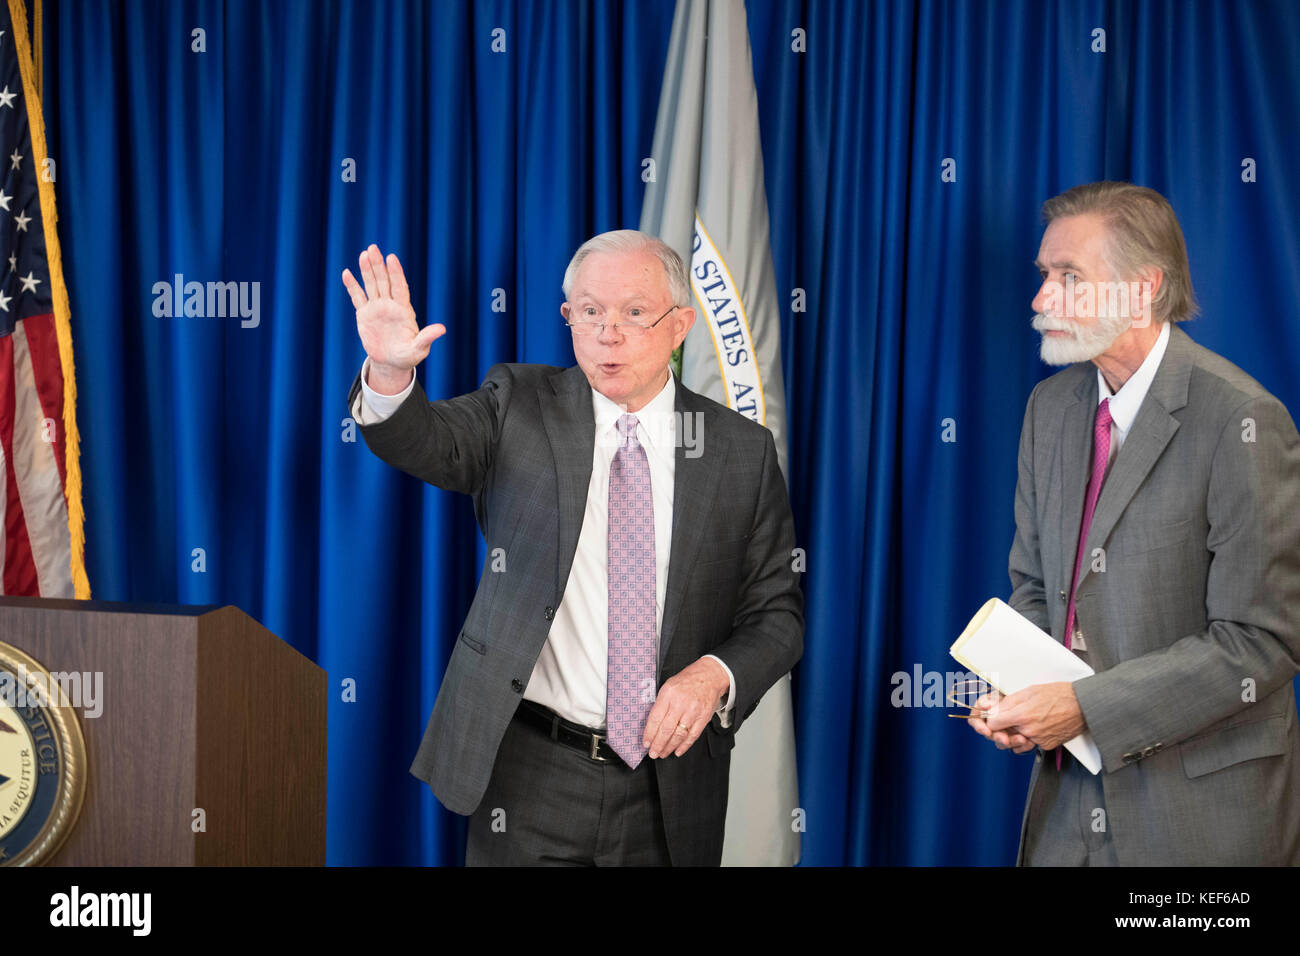 Austin, USA. 20th Oct, 2017. U.S. Attorney General Jeff Sessions (left), accompanied by U.S. Attorney for the Western District of Texas, Richard Durbin, Jr.(right), visits with U.S. attorneys to discuss the Trump administration's immigration policy in Austin, Texas. Sessions was met by a few dozen protesters but no incidents were reported. Credit: Bob Daemmrich/Alamy Live News Stock Photo